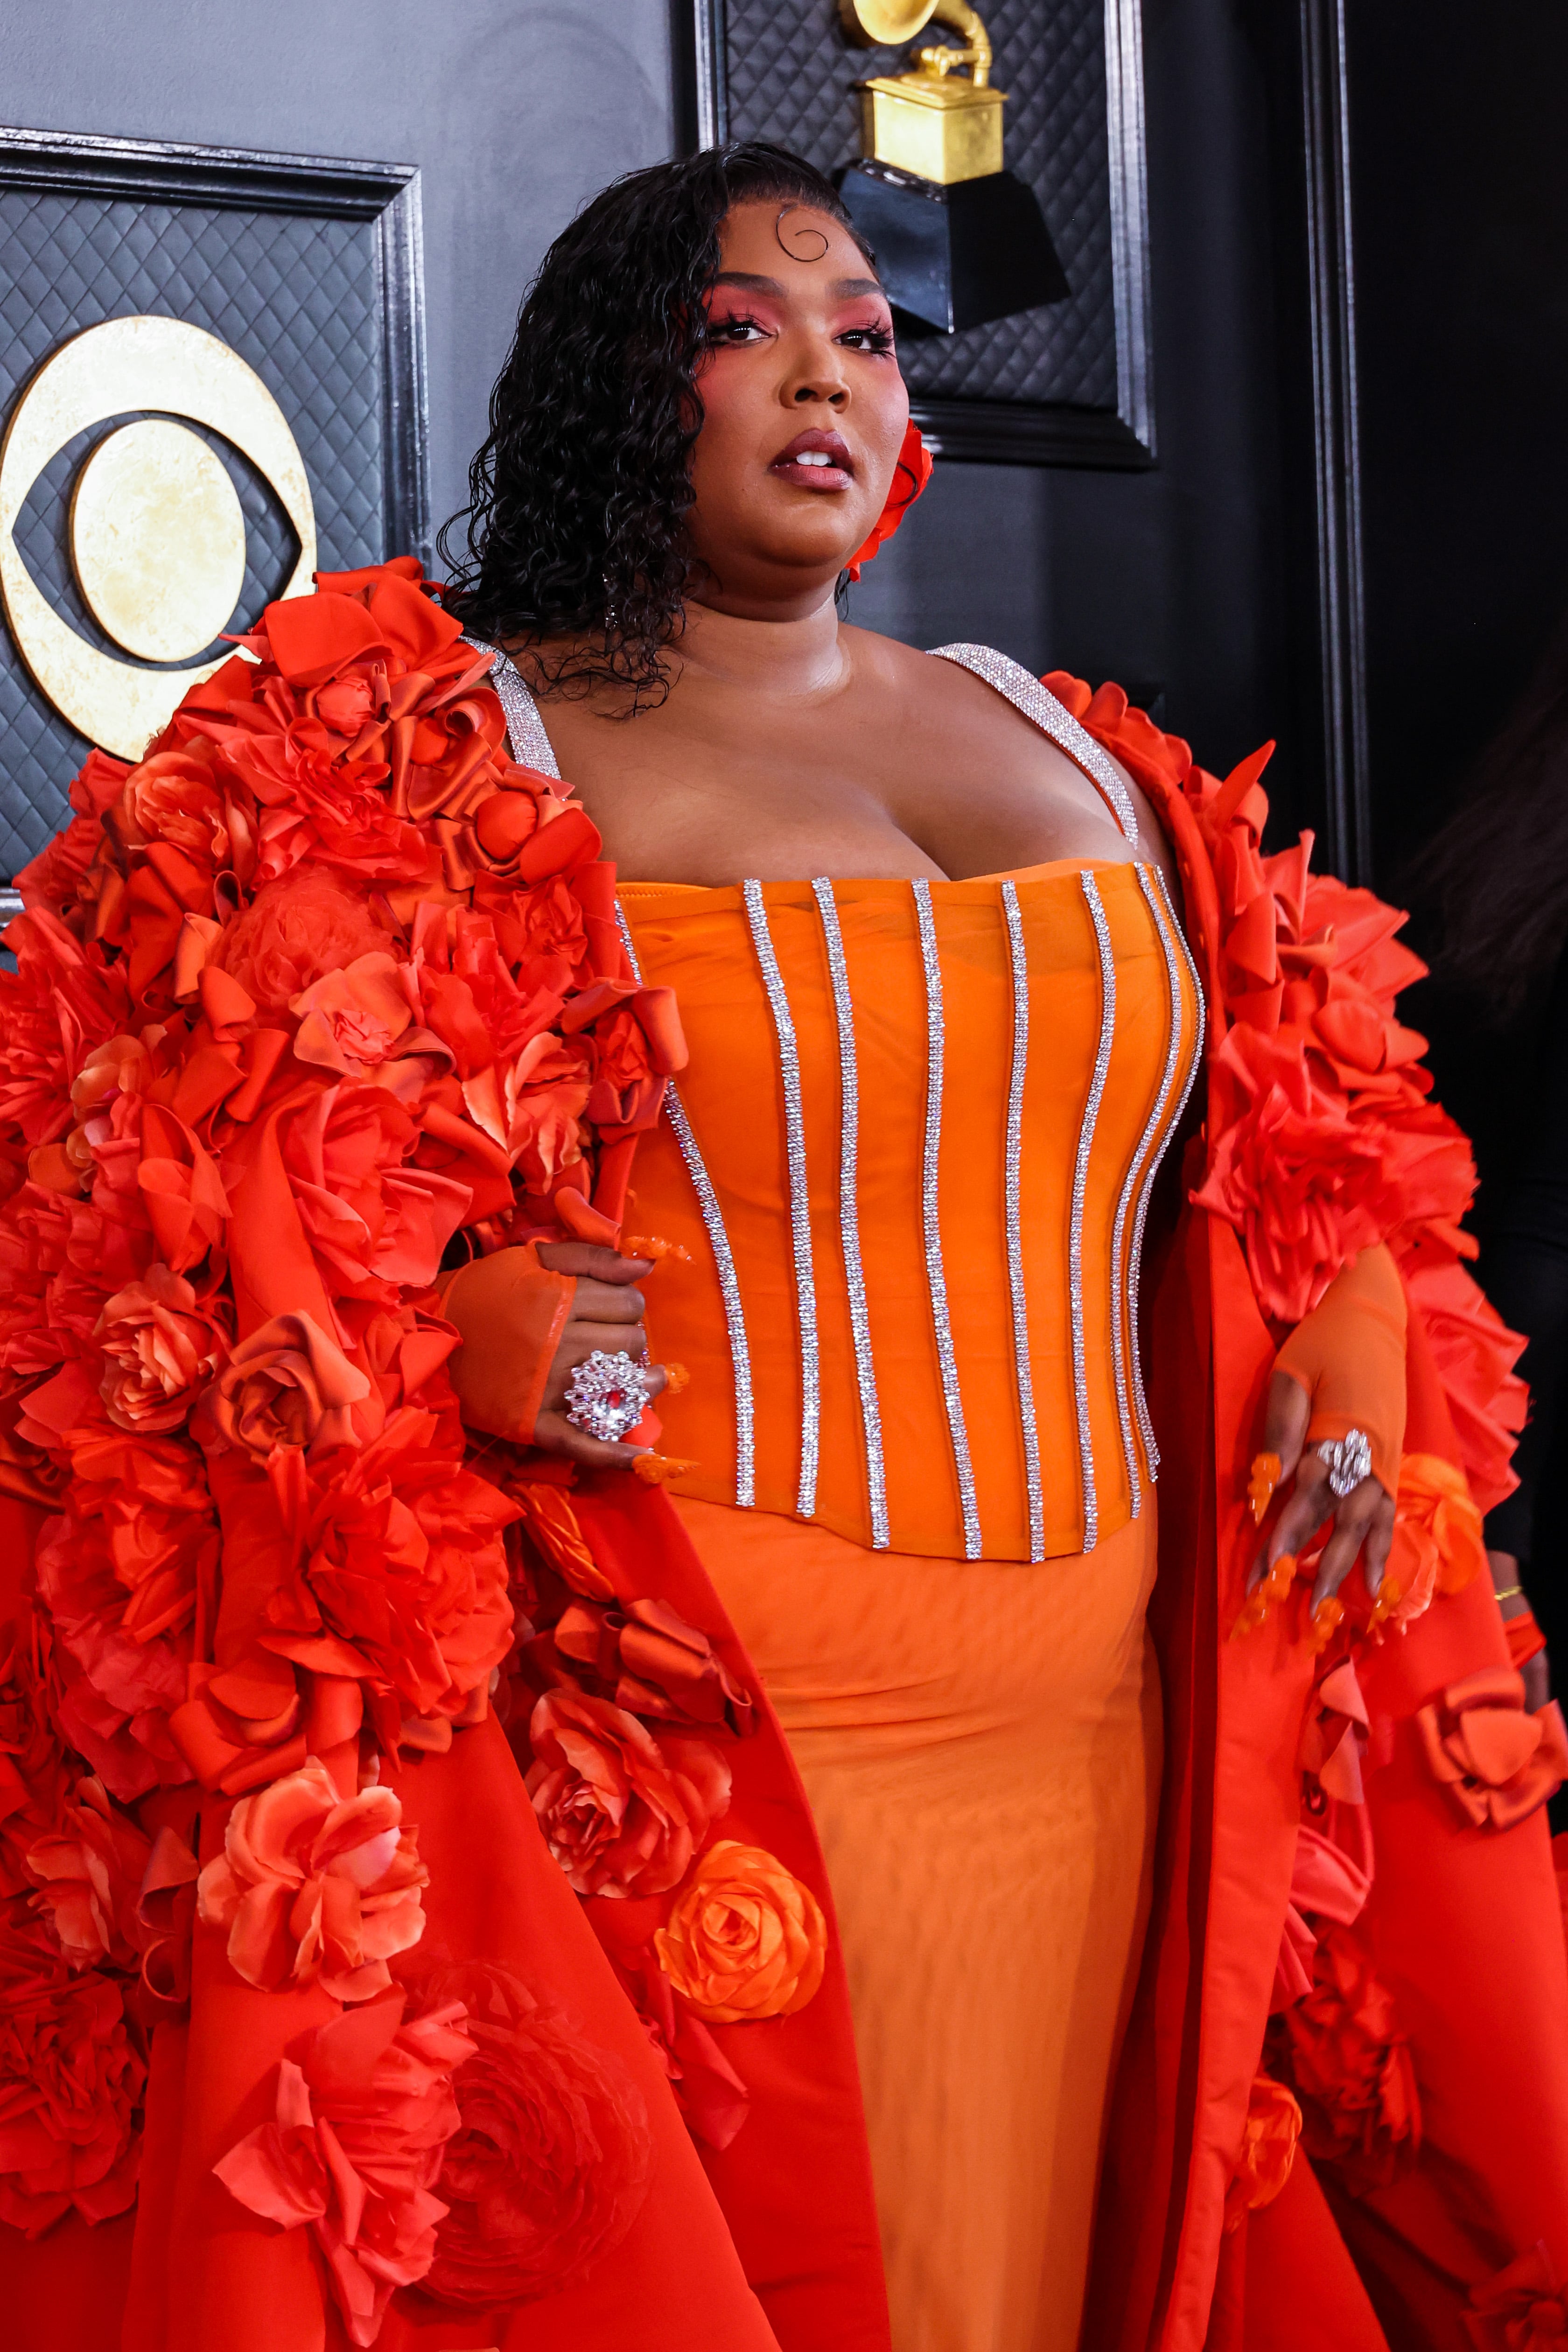 Lizzo Celebrates in Silver Dress & Flower Heels at Grammy Awards 2023